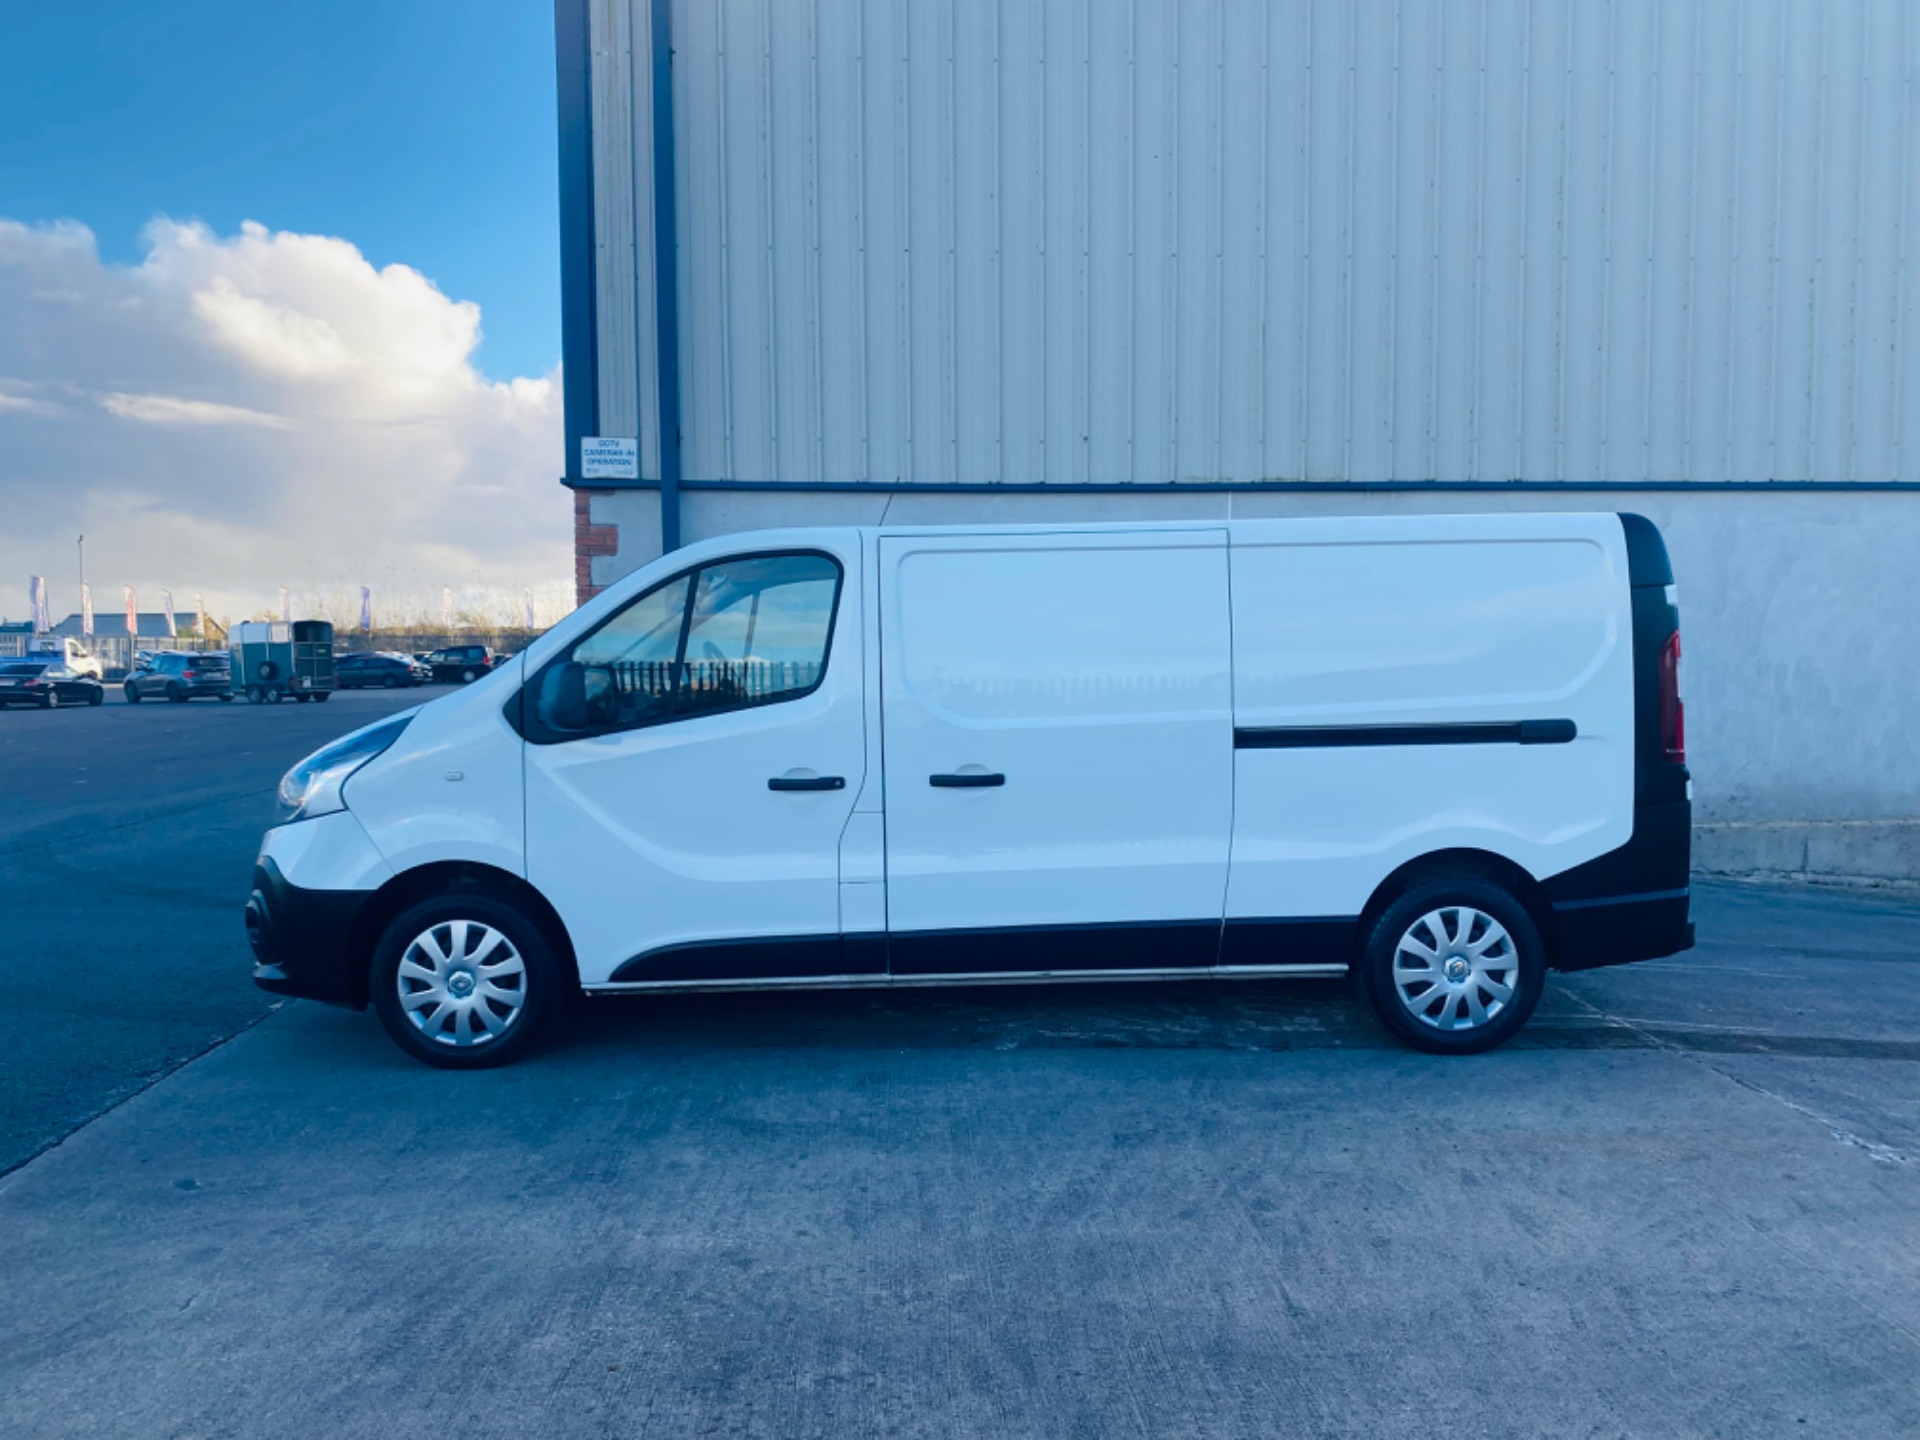 2019 Renault Trafic LL29 DCI 120 Business (191D7850) Thumbnail 7